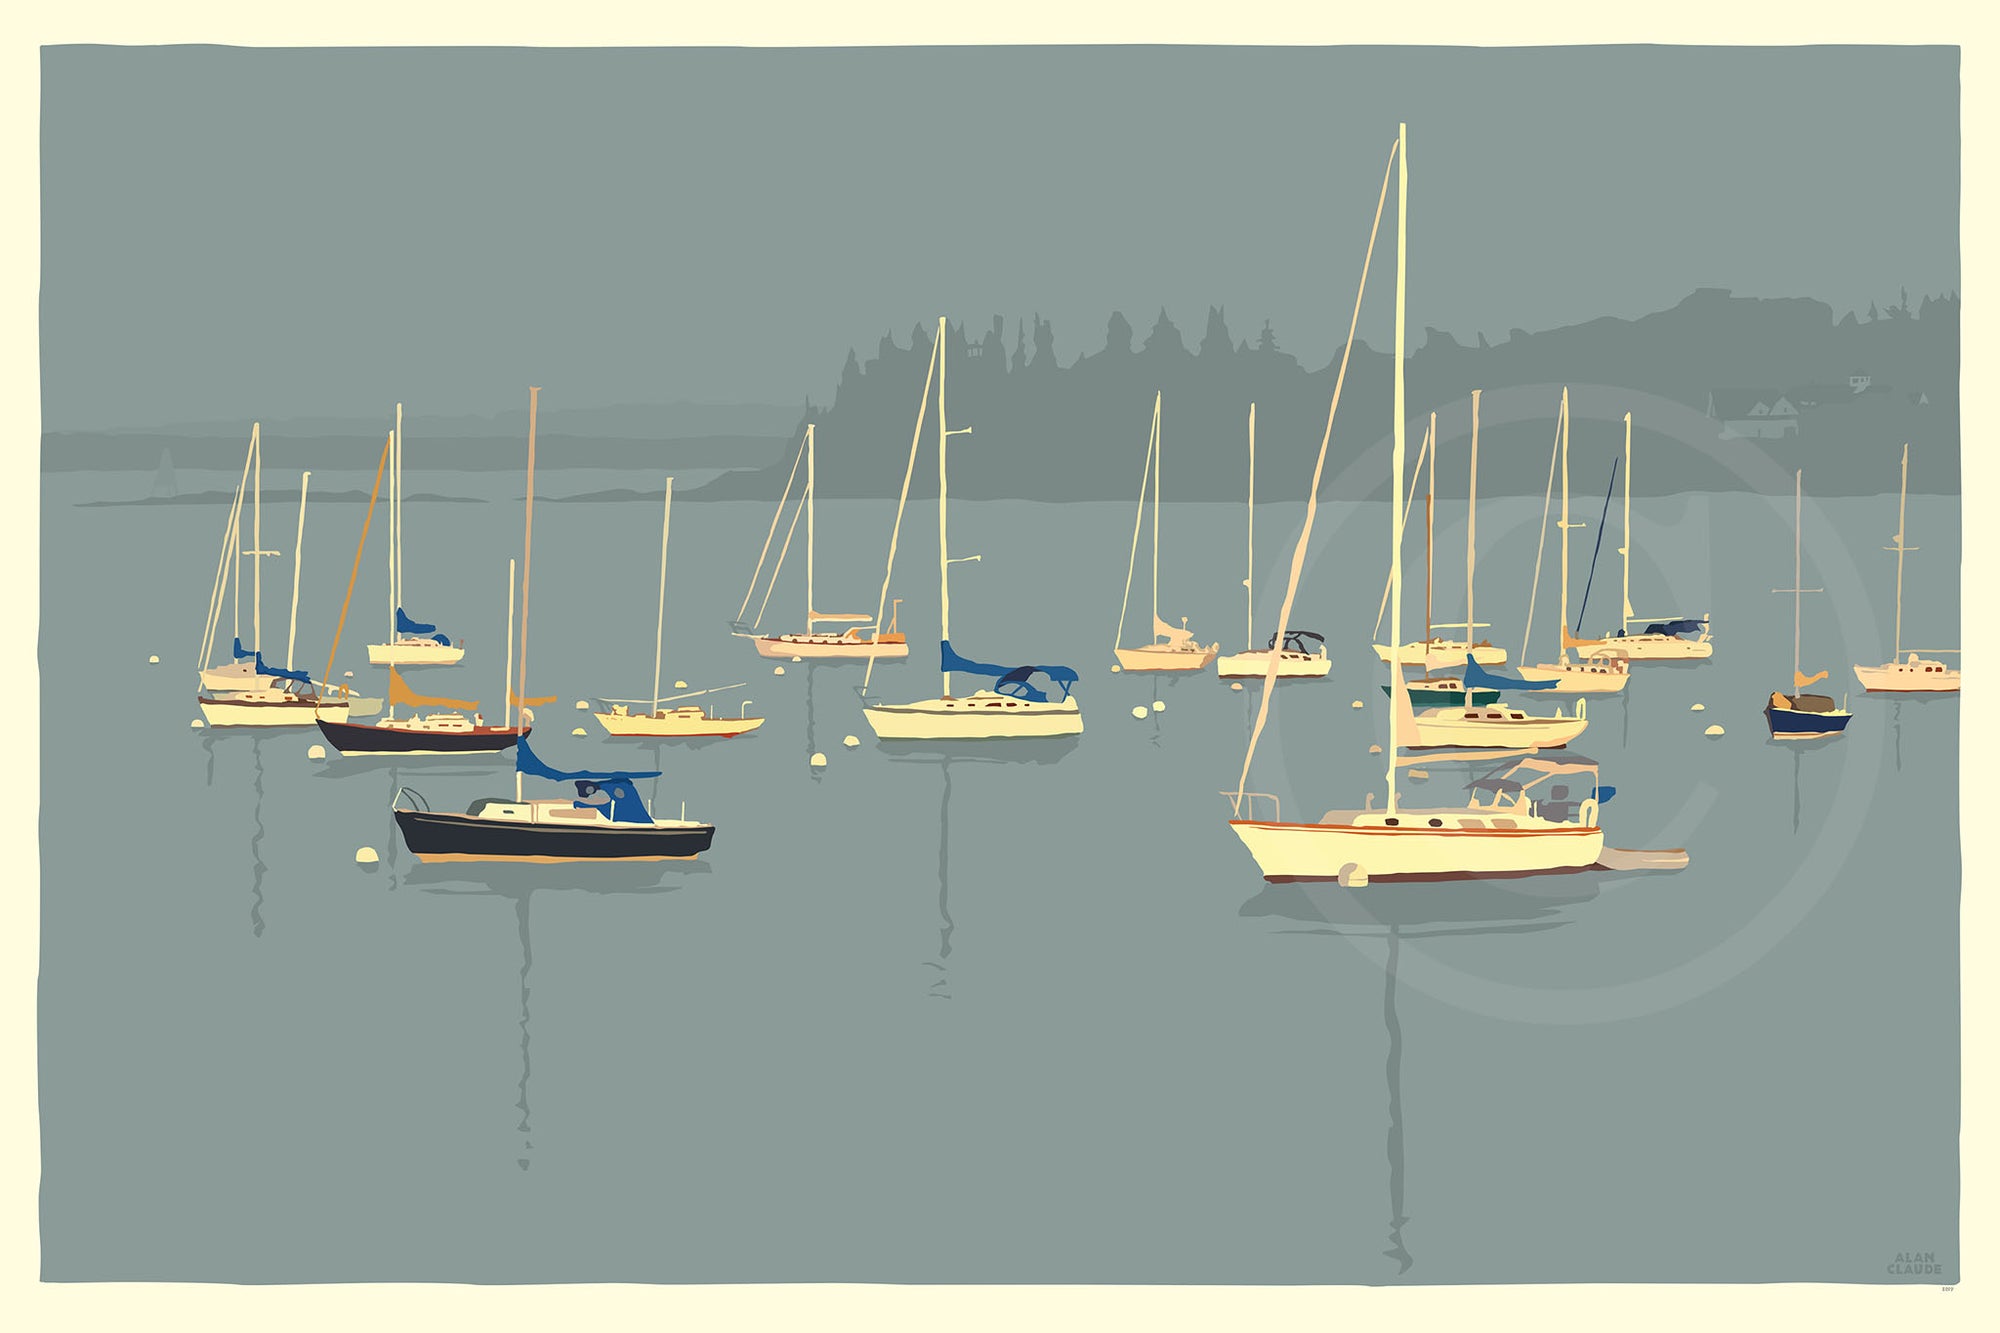 Sailboats in Rockland Harbor Art Print 36" x 53" Wall Poster By Alan Claude - Maine